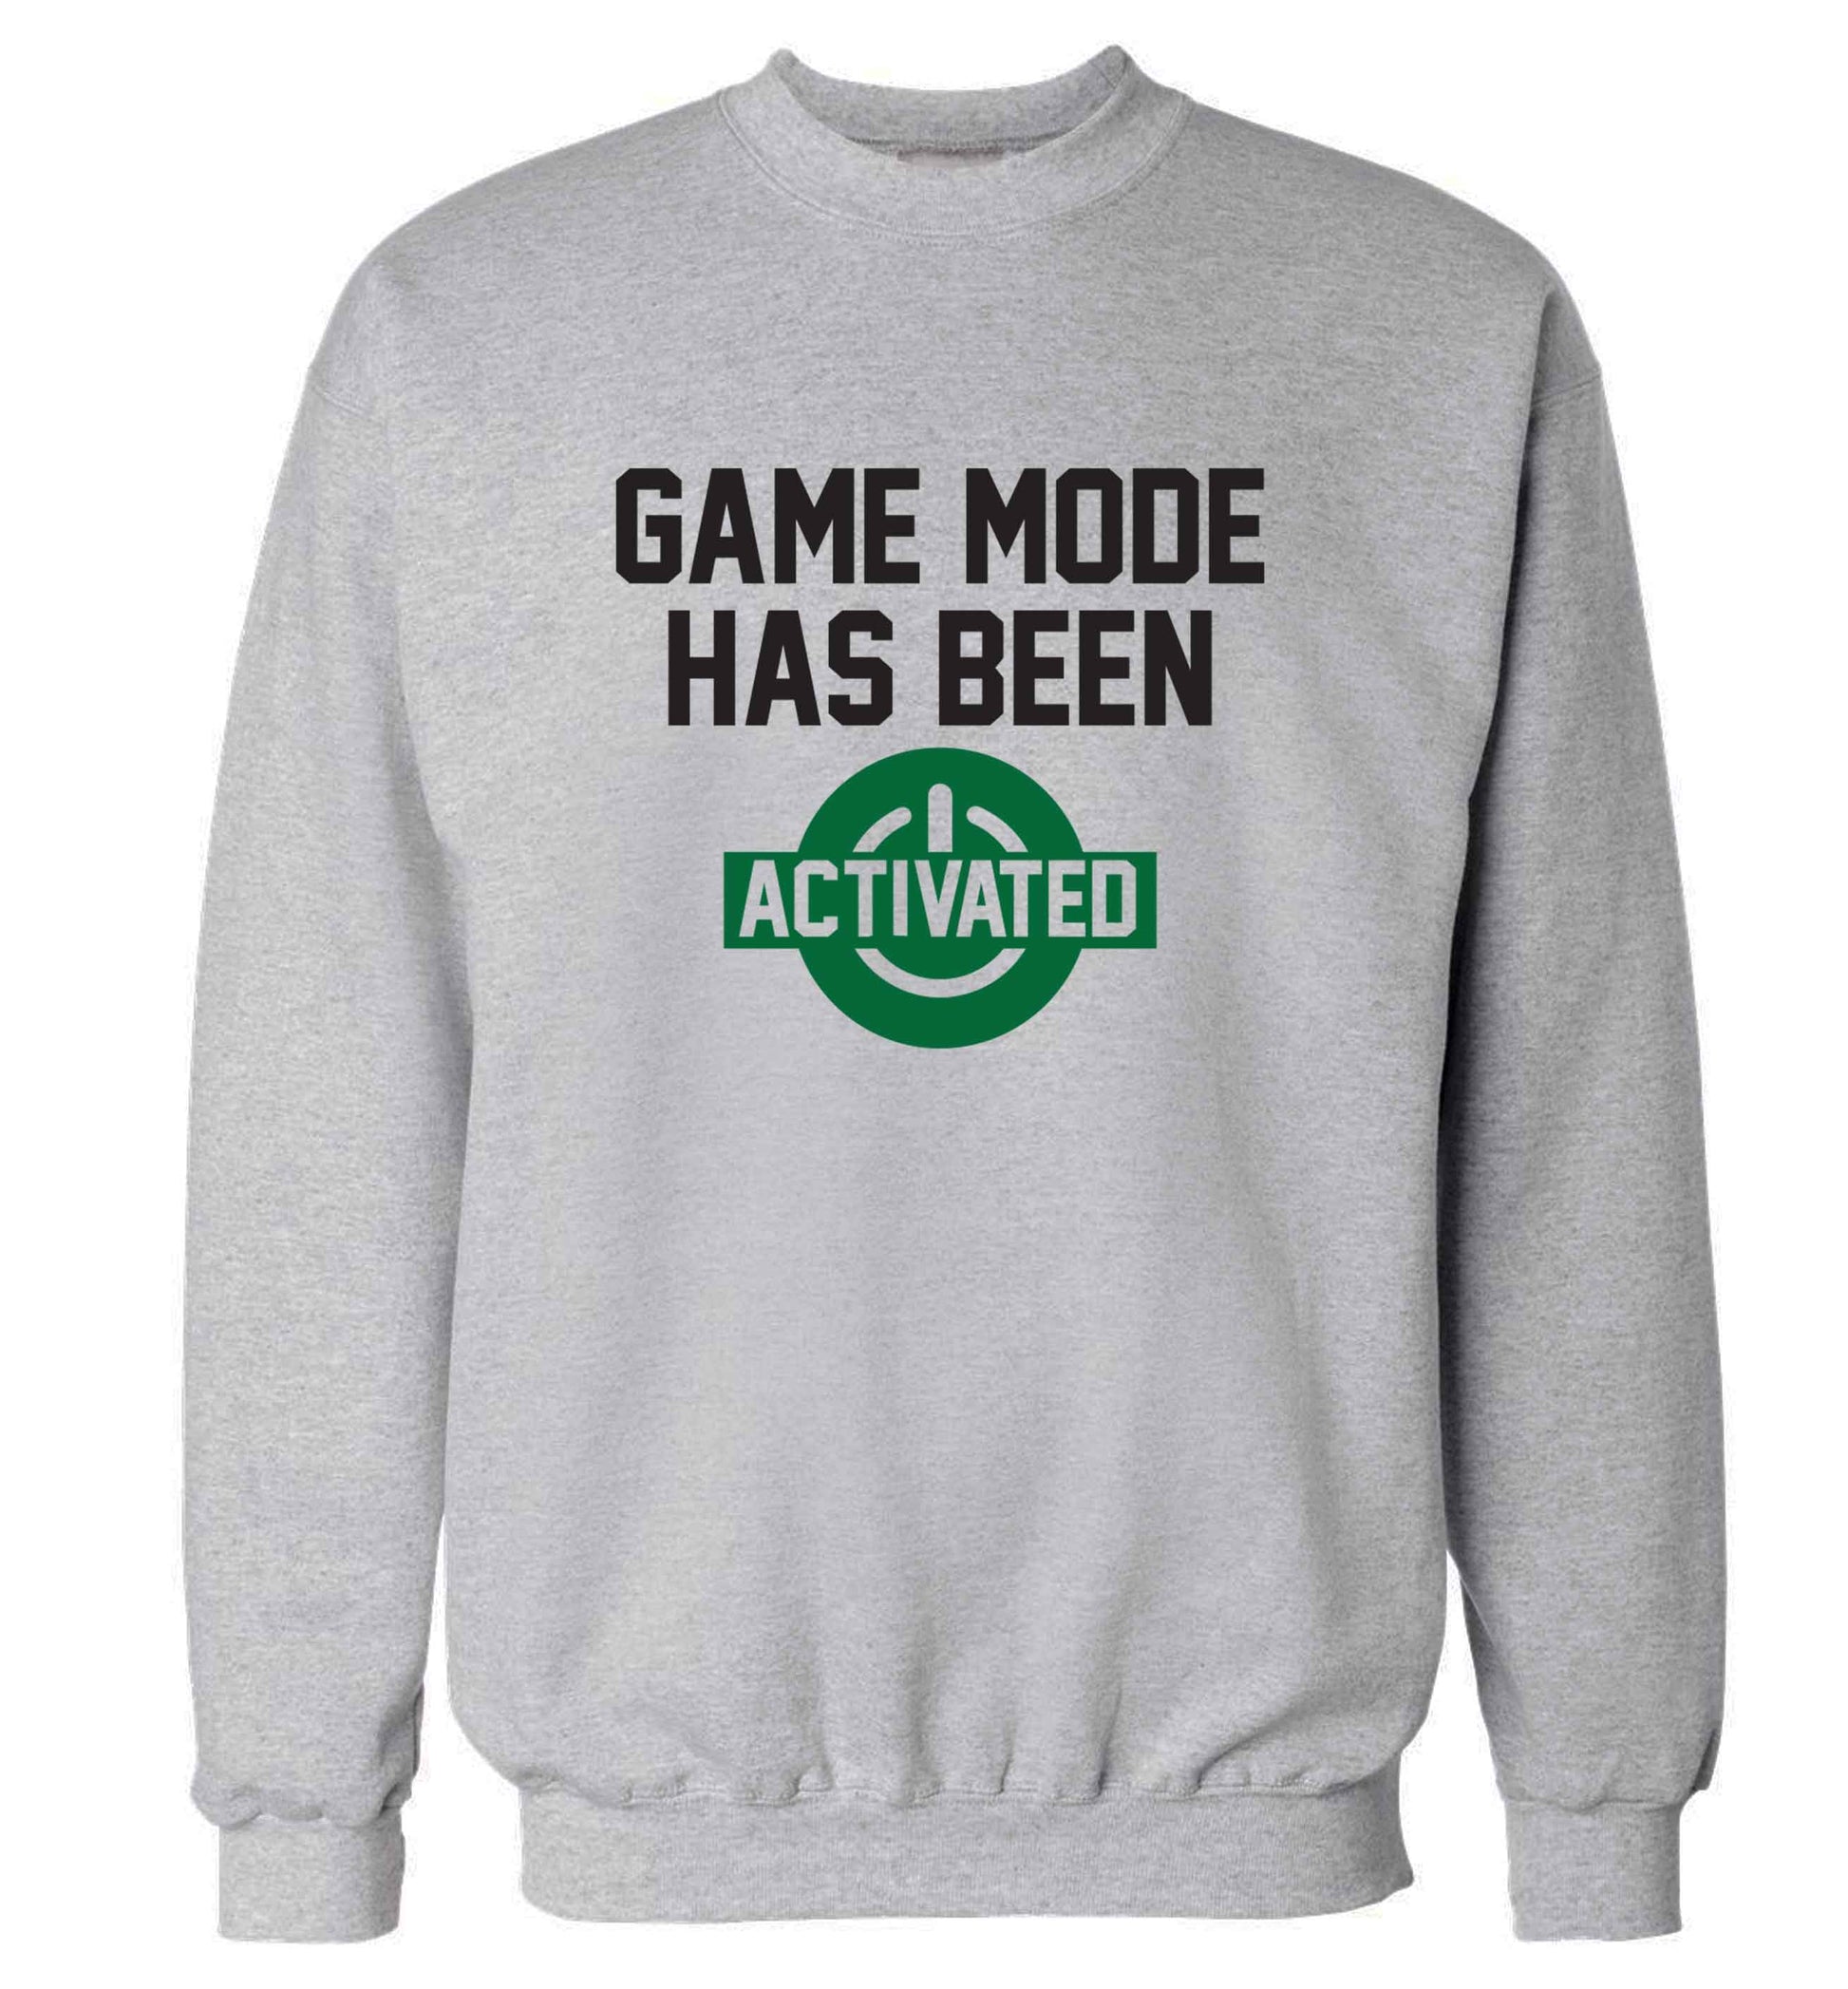 Game mode has been activated adult's unisex grey sweater 2XL